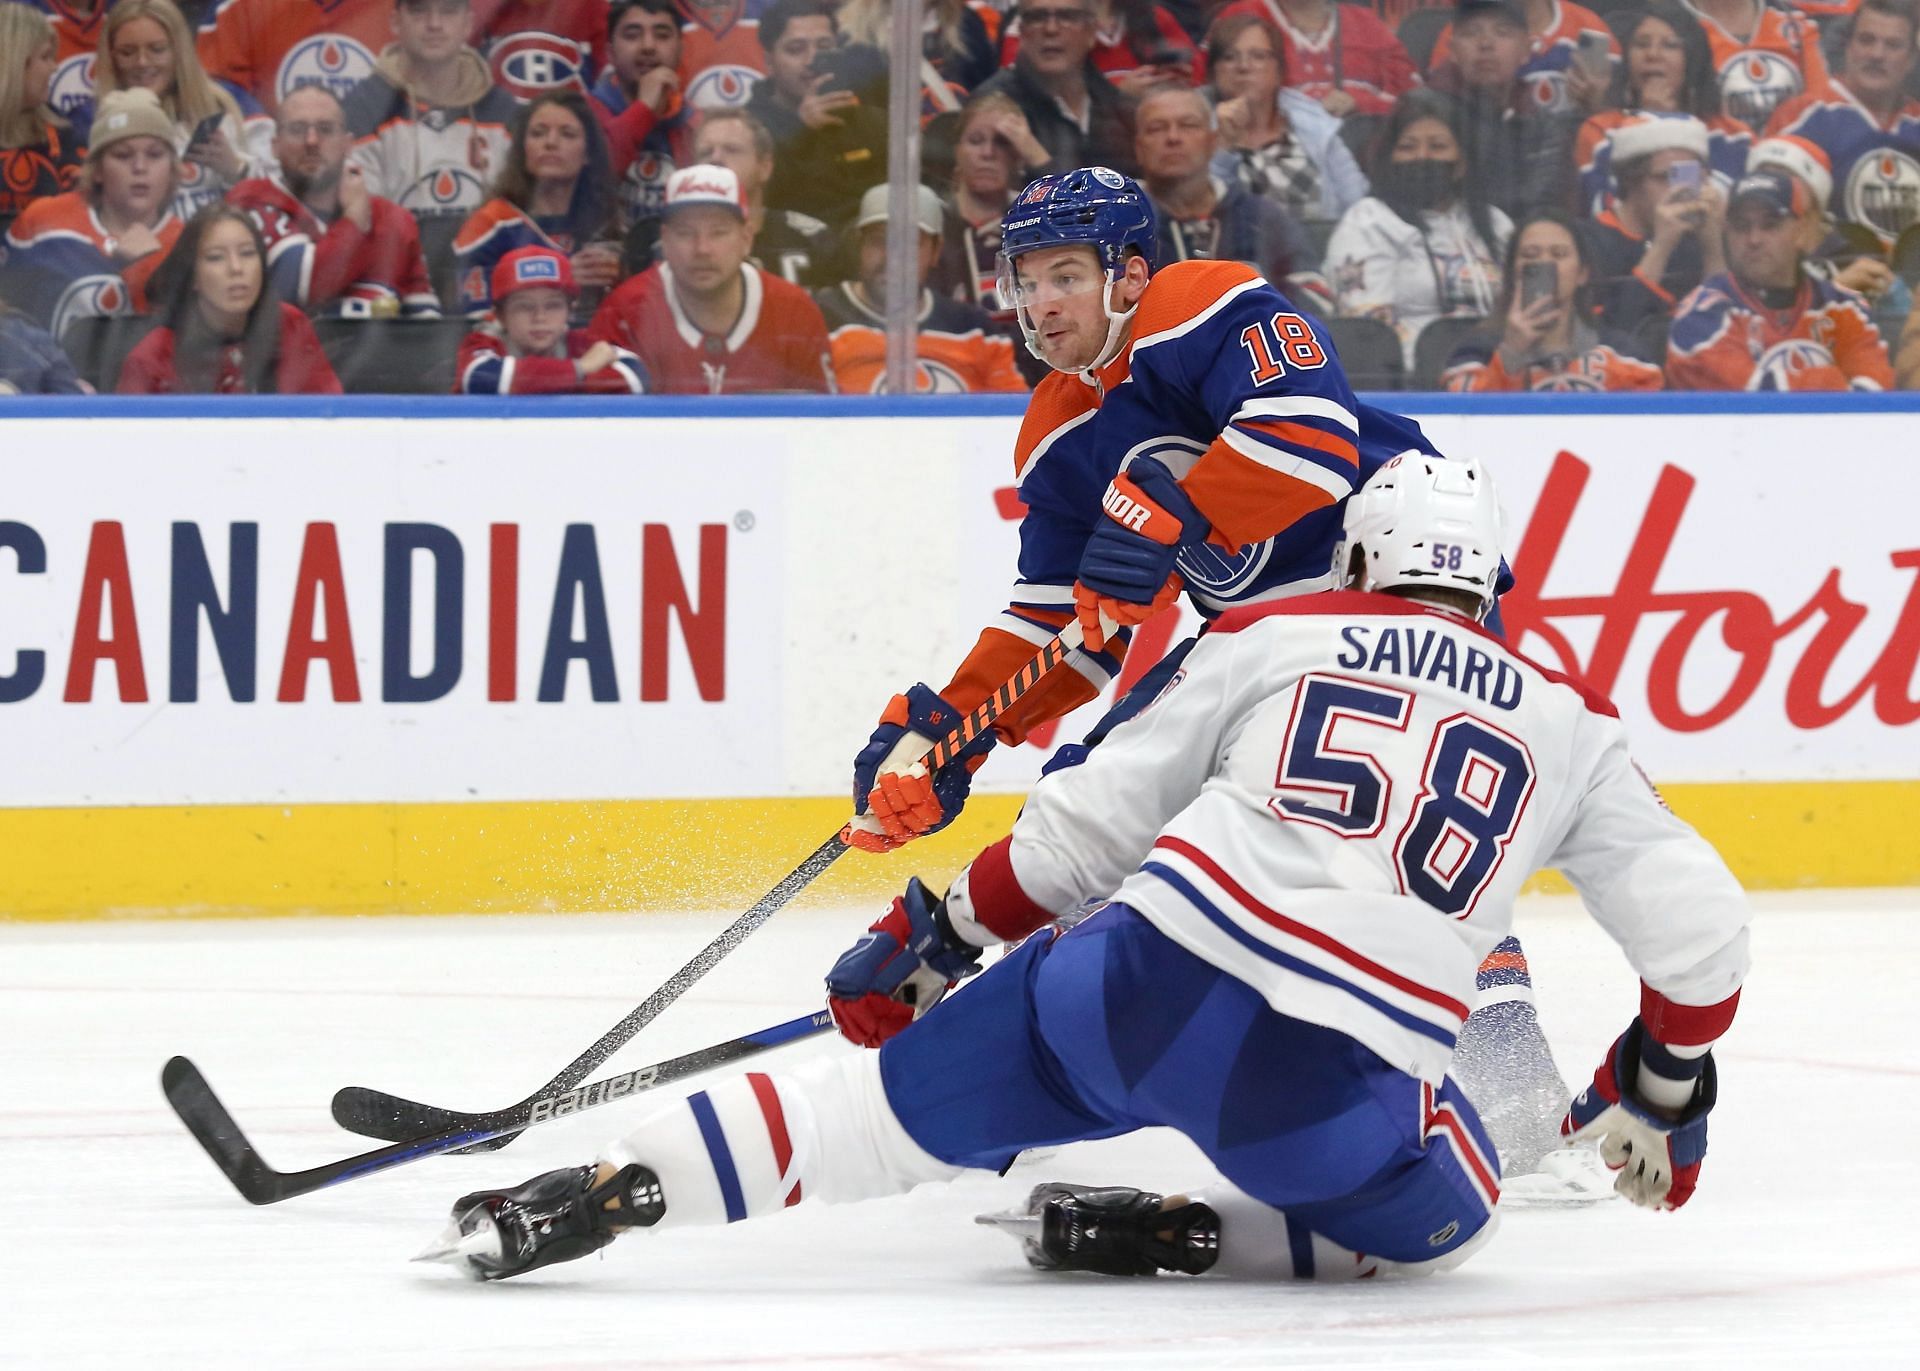 Edmonton Oilers vs Montreal Canadiens Live streaming options, where